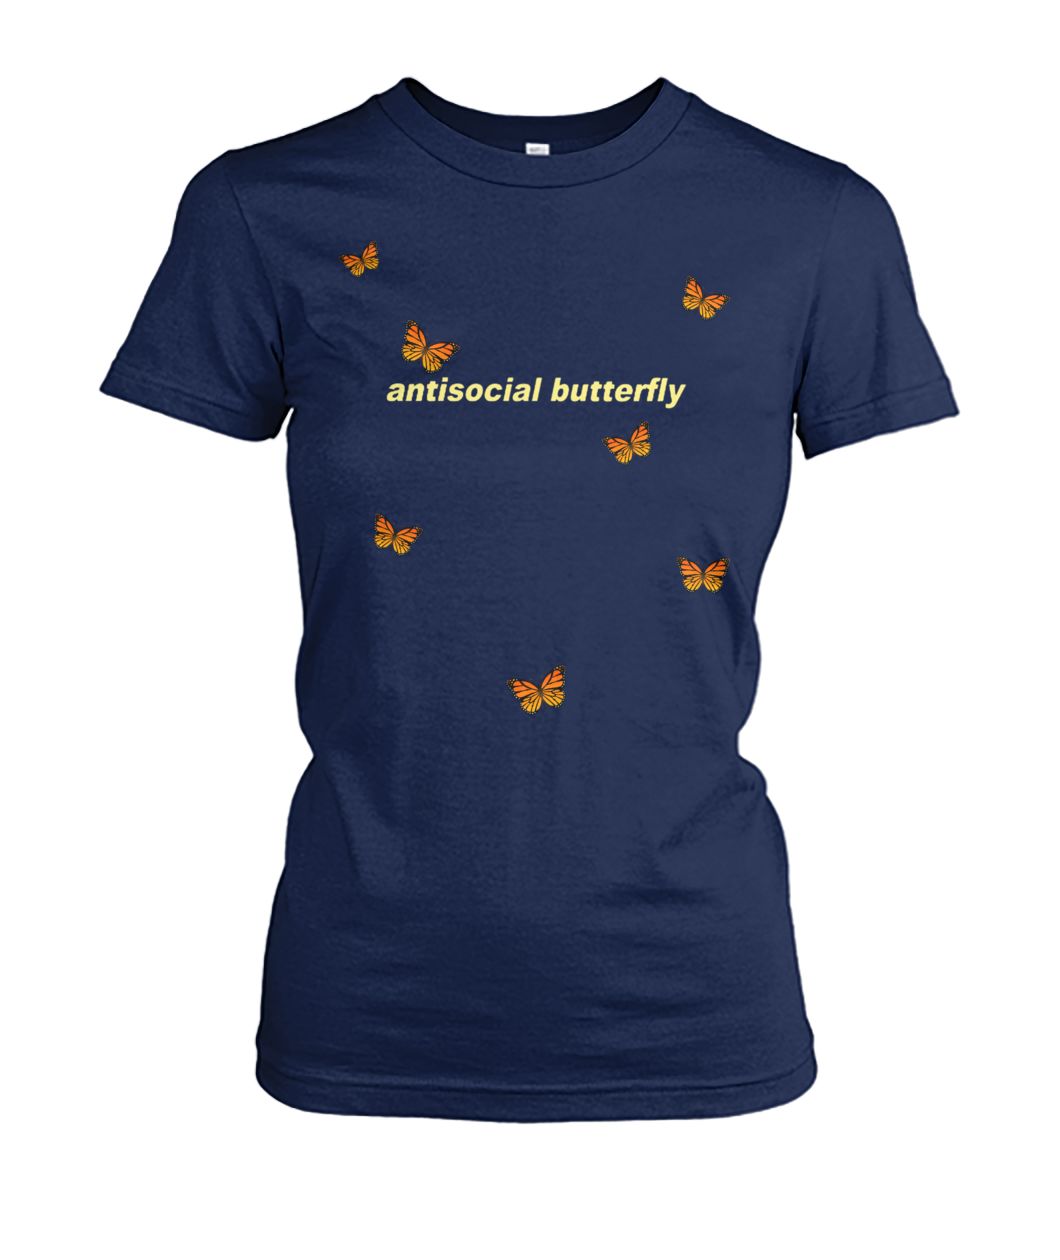 Antisocial butterfly women's crew tee